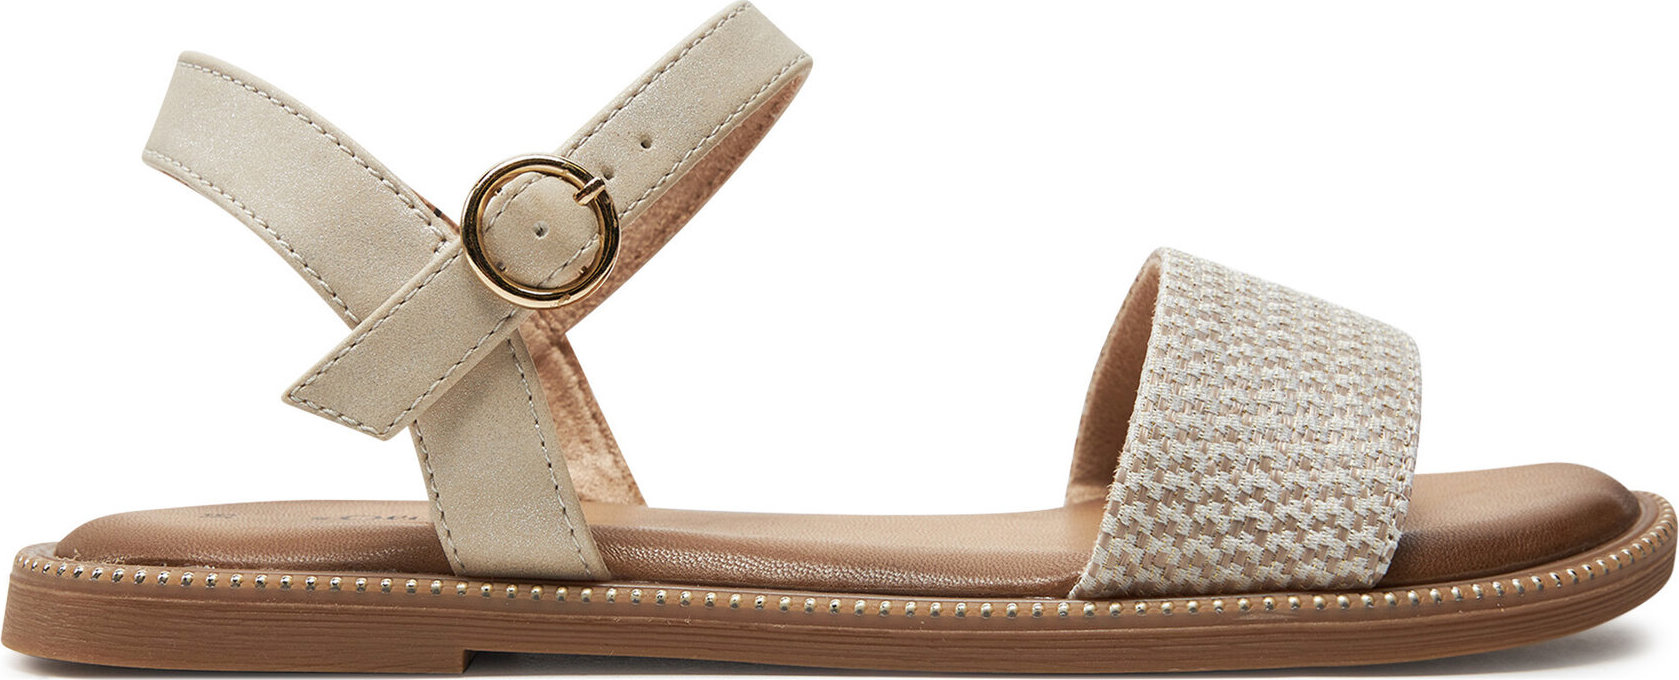 Sandály s.Oliver 5-28133-42 Beige Comb 410